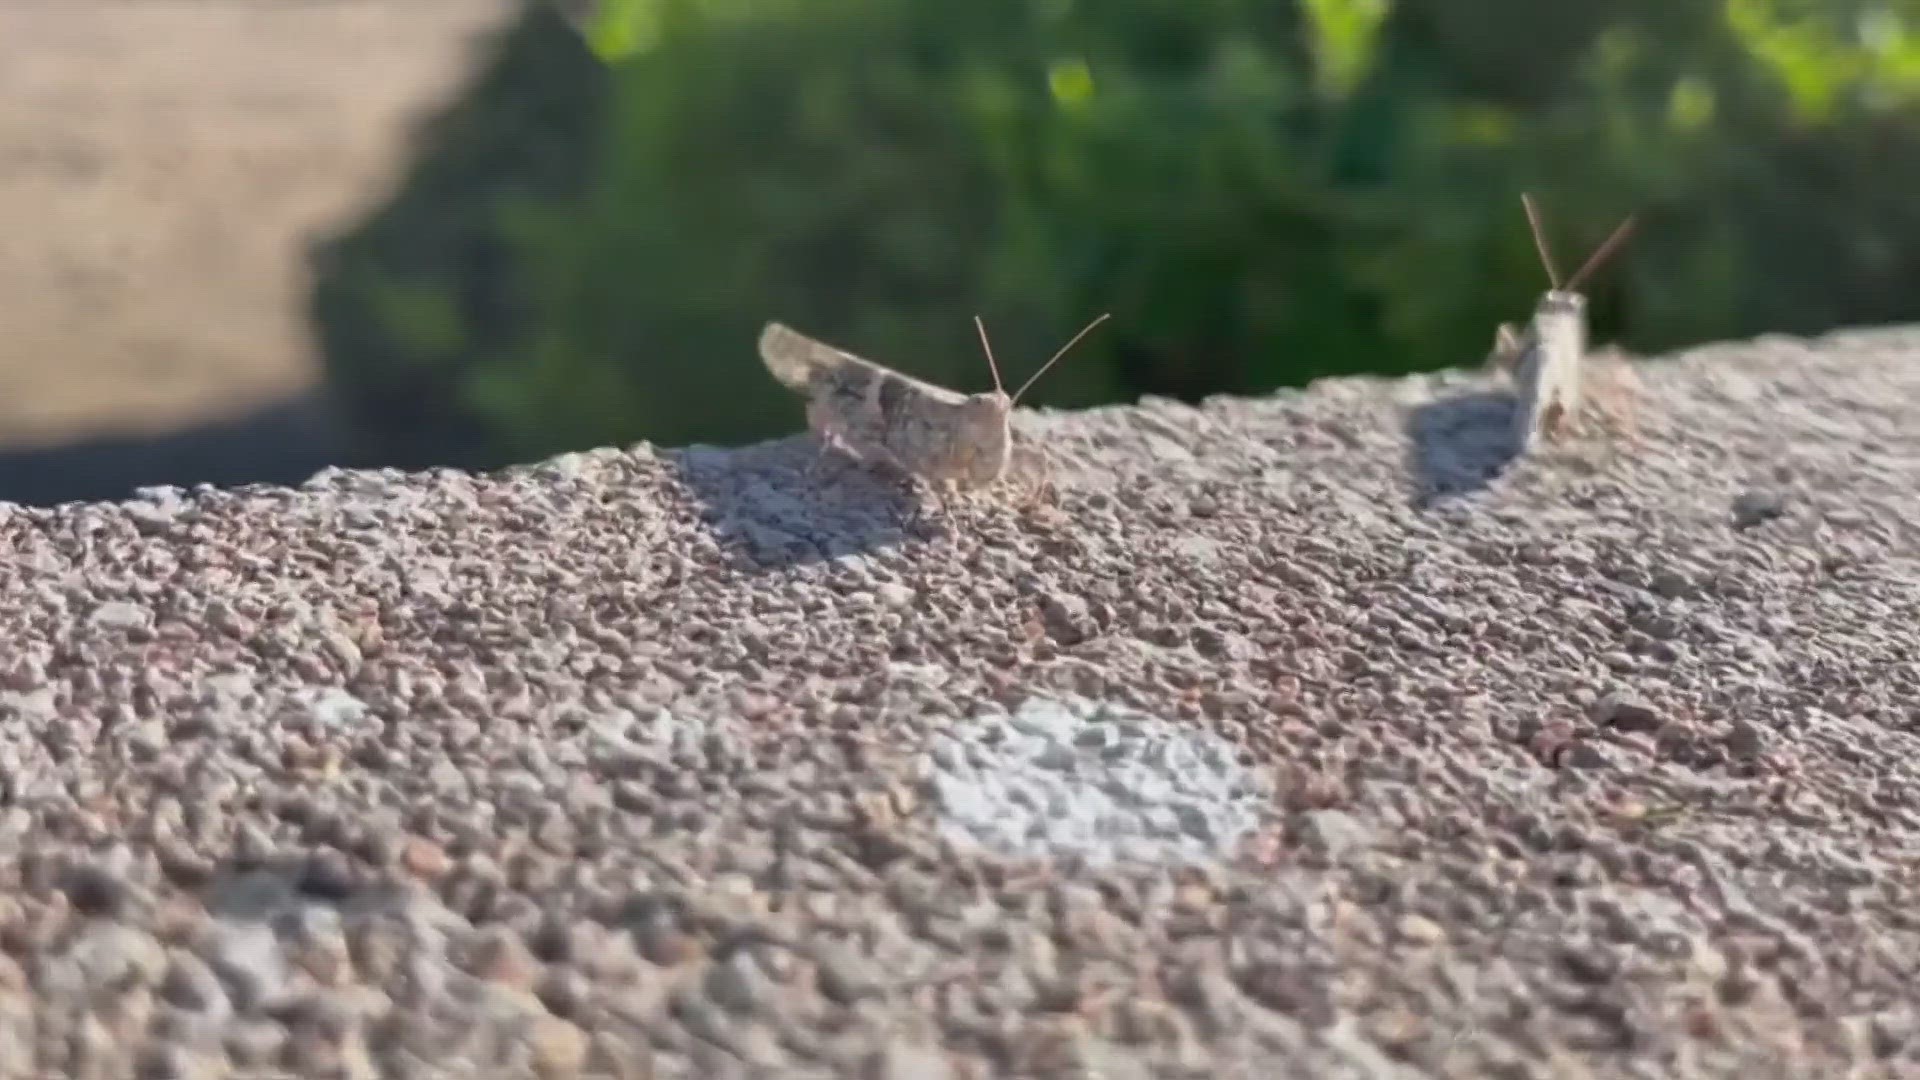 The pallid-winged grasshopper is the most common kind we are seeing, according to experts